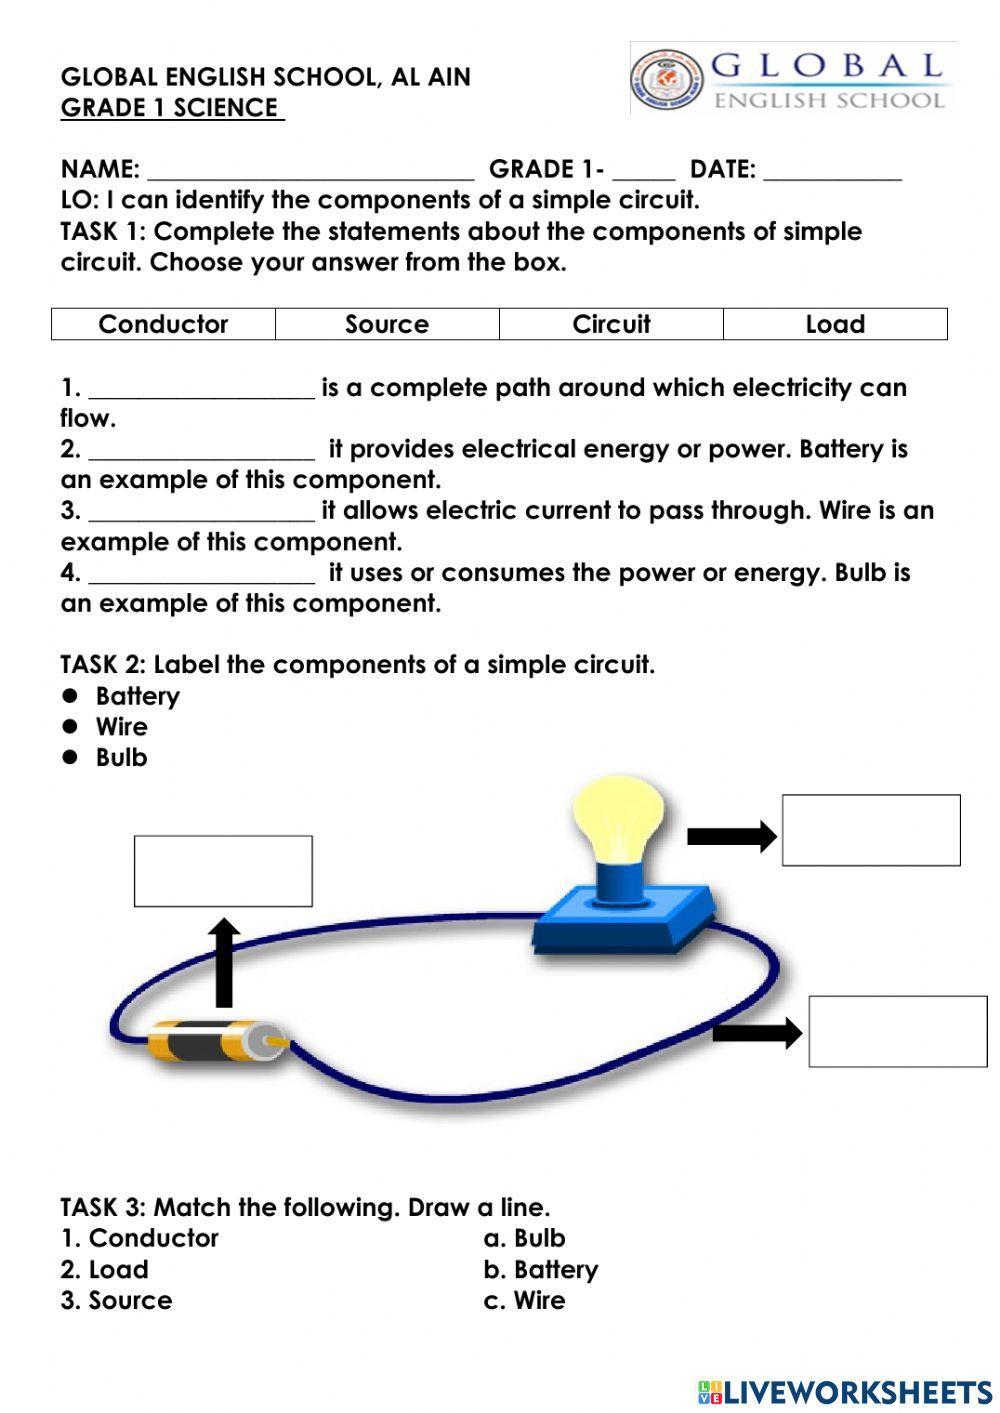 Components of circuit